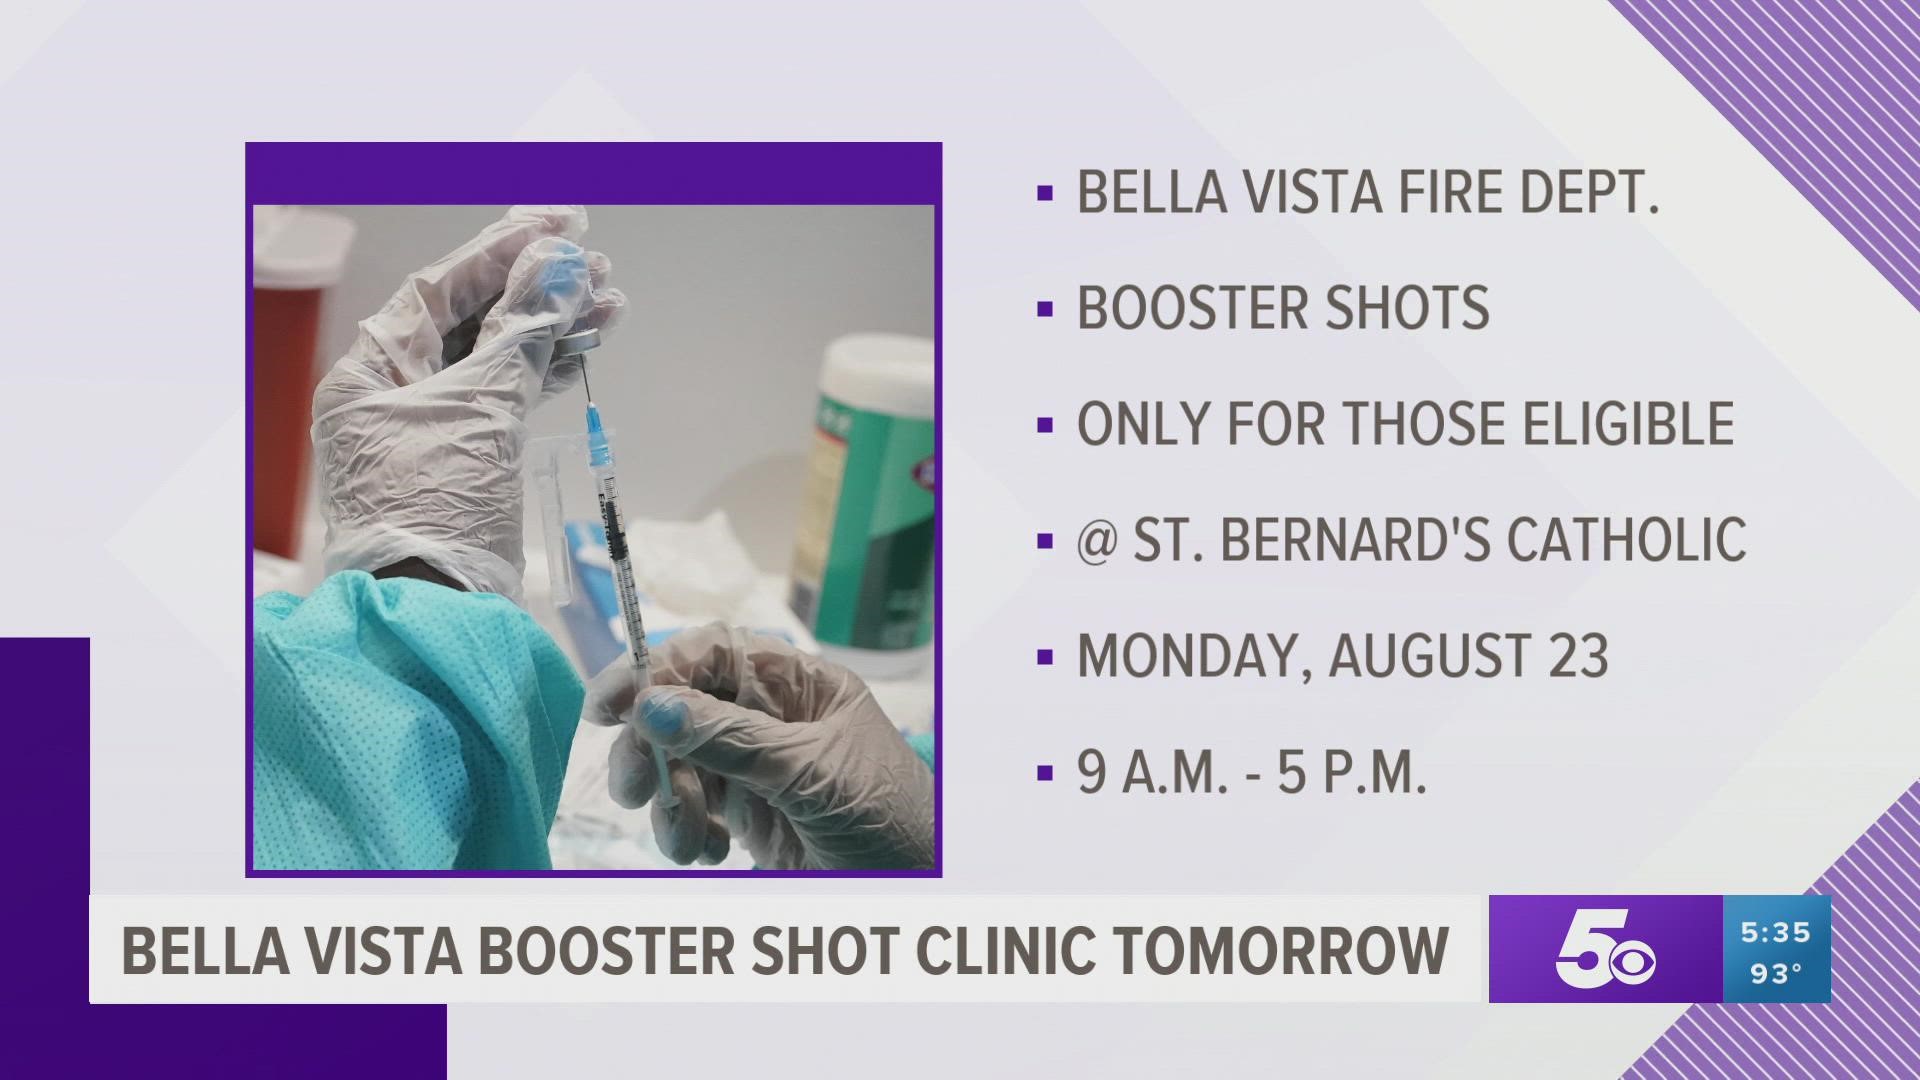 The clinic will be held at St. Bernard's Catholic Church on Aug. 23 from 9 a.m. to 5 p.m.